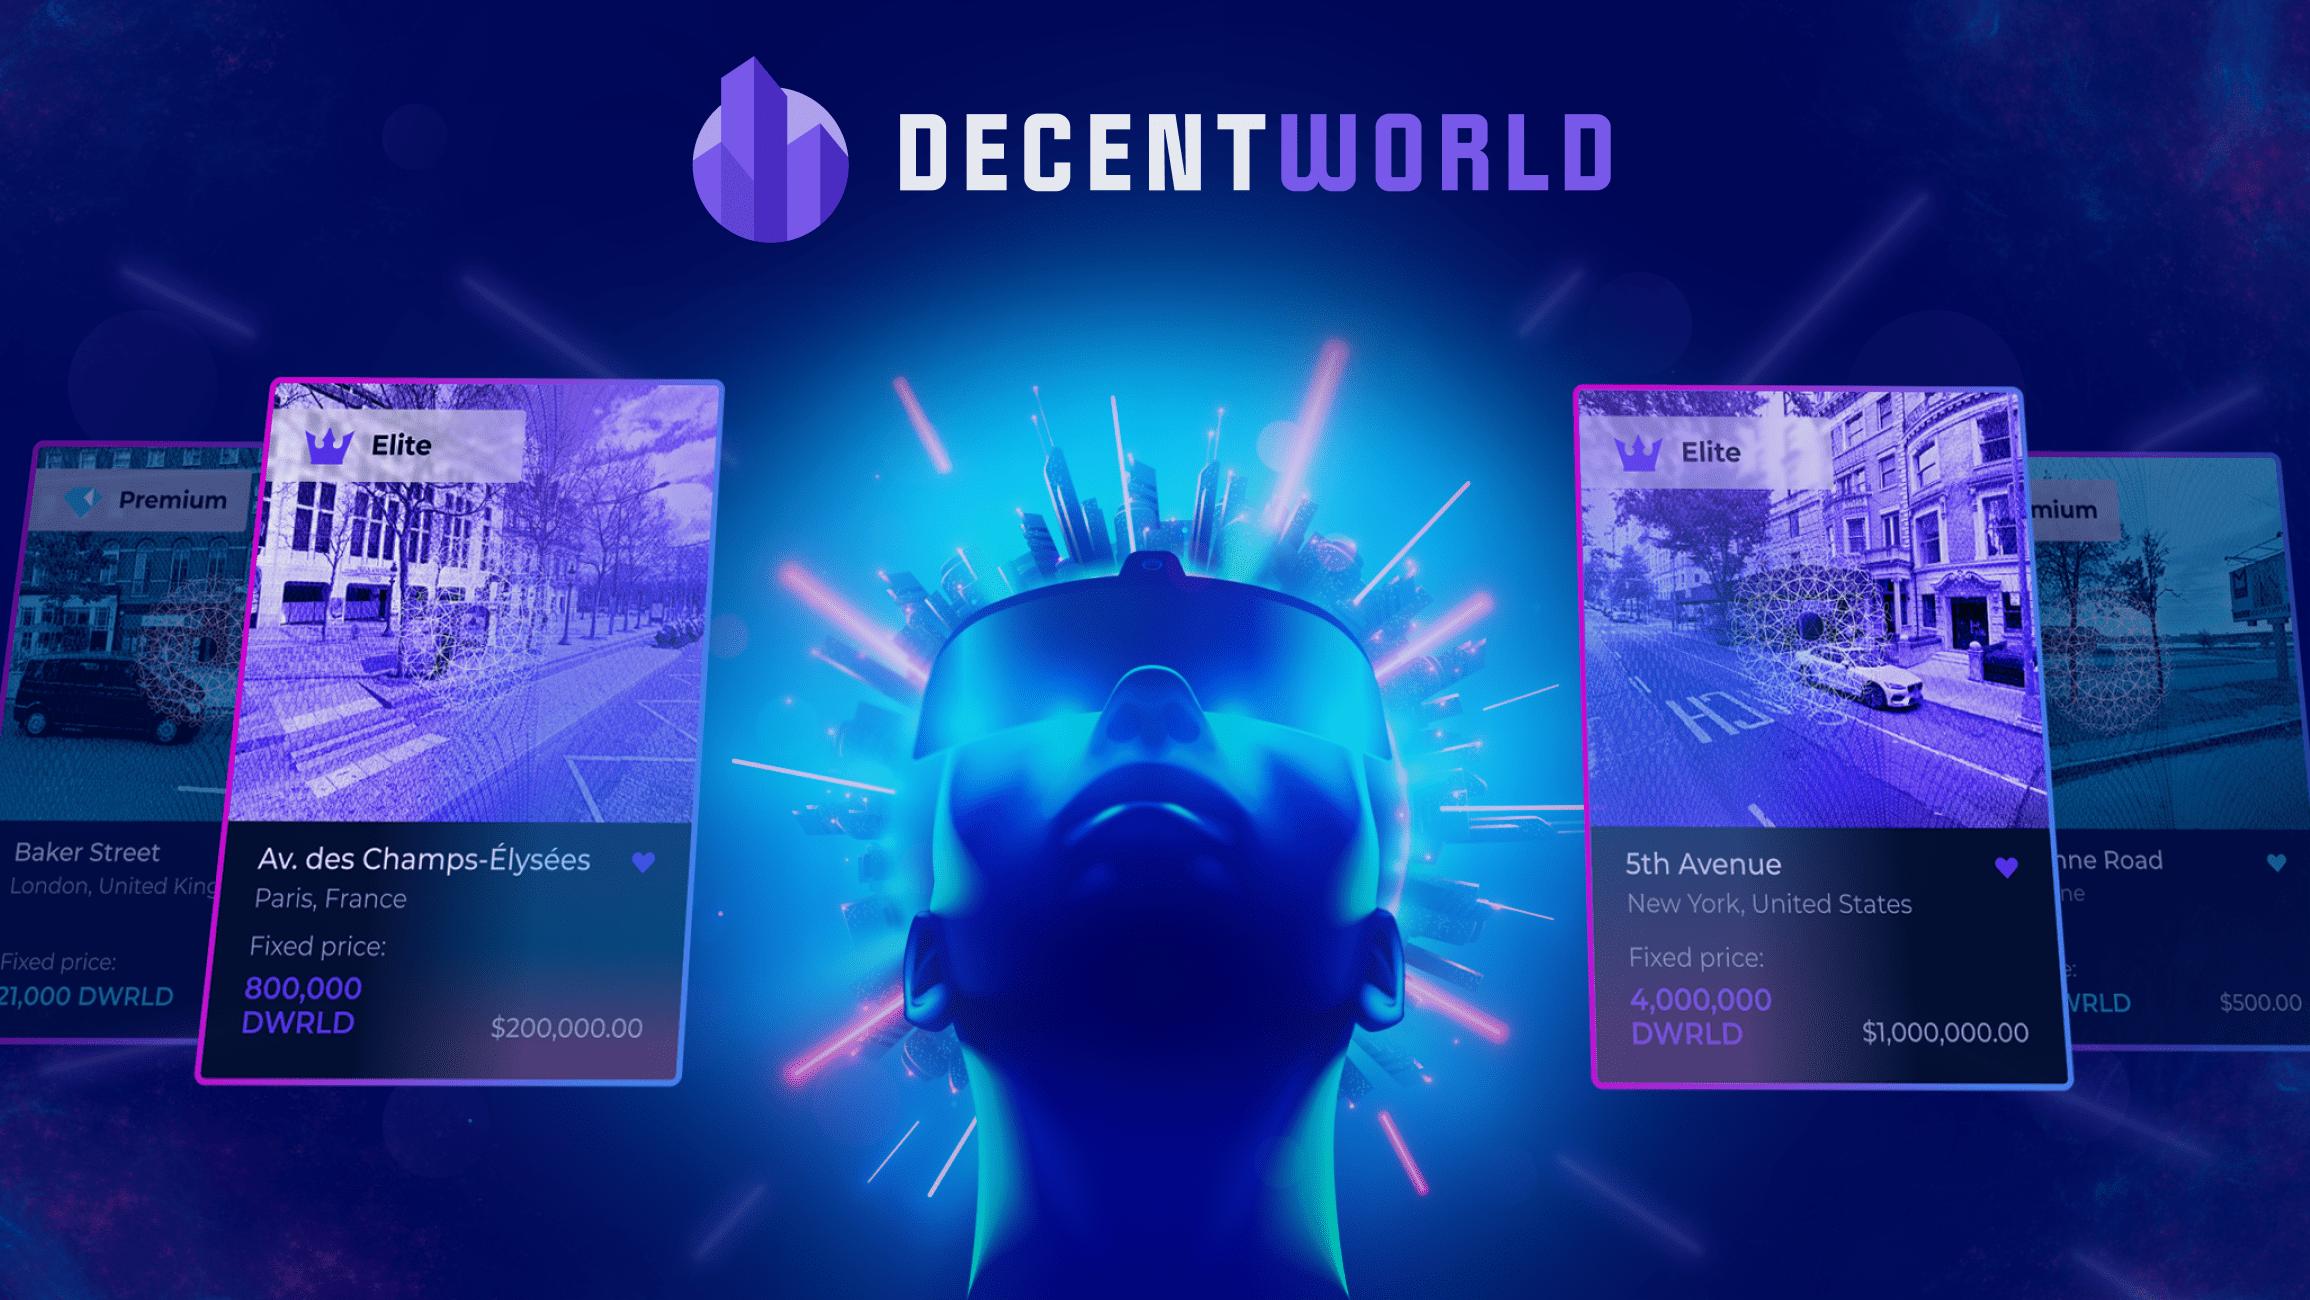 $19M Sales in Less Than Two Months: DecentWorld Metaverse Shares First Results